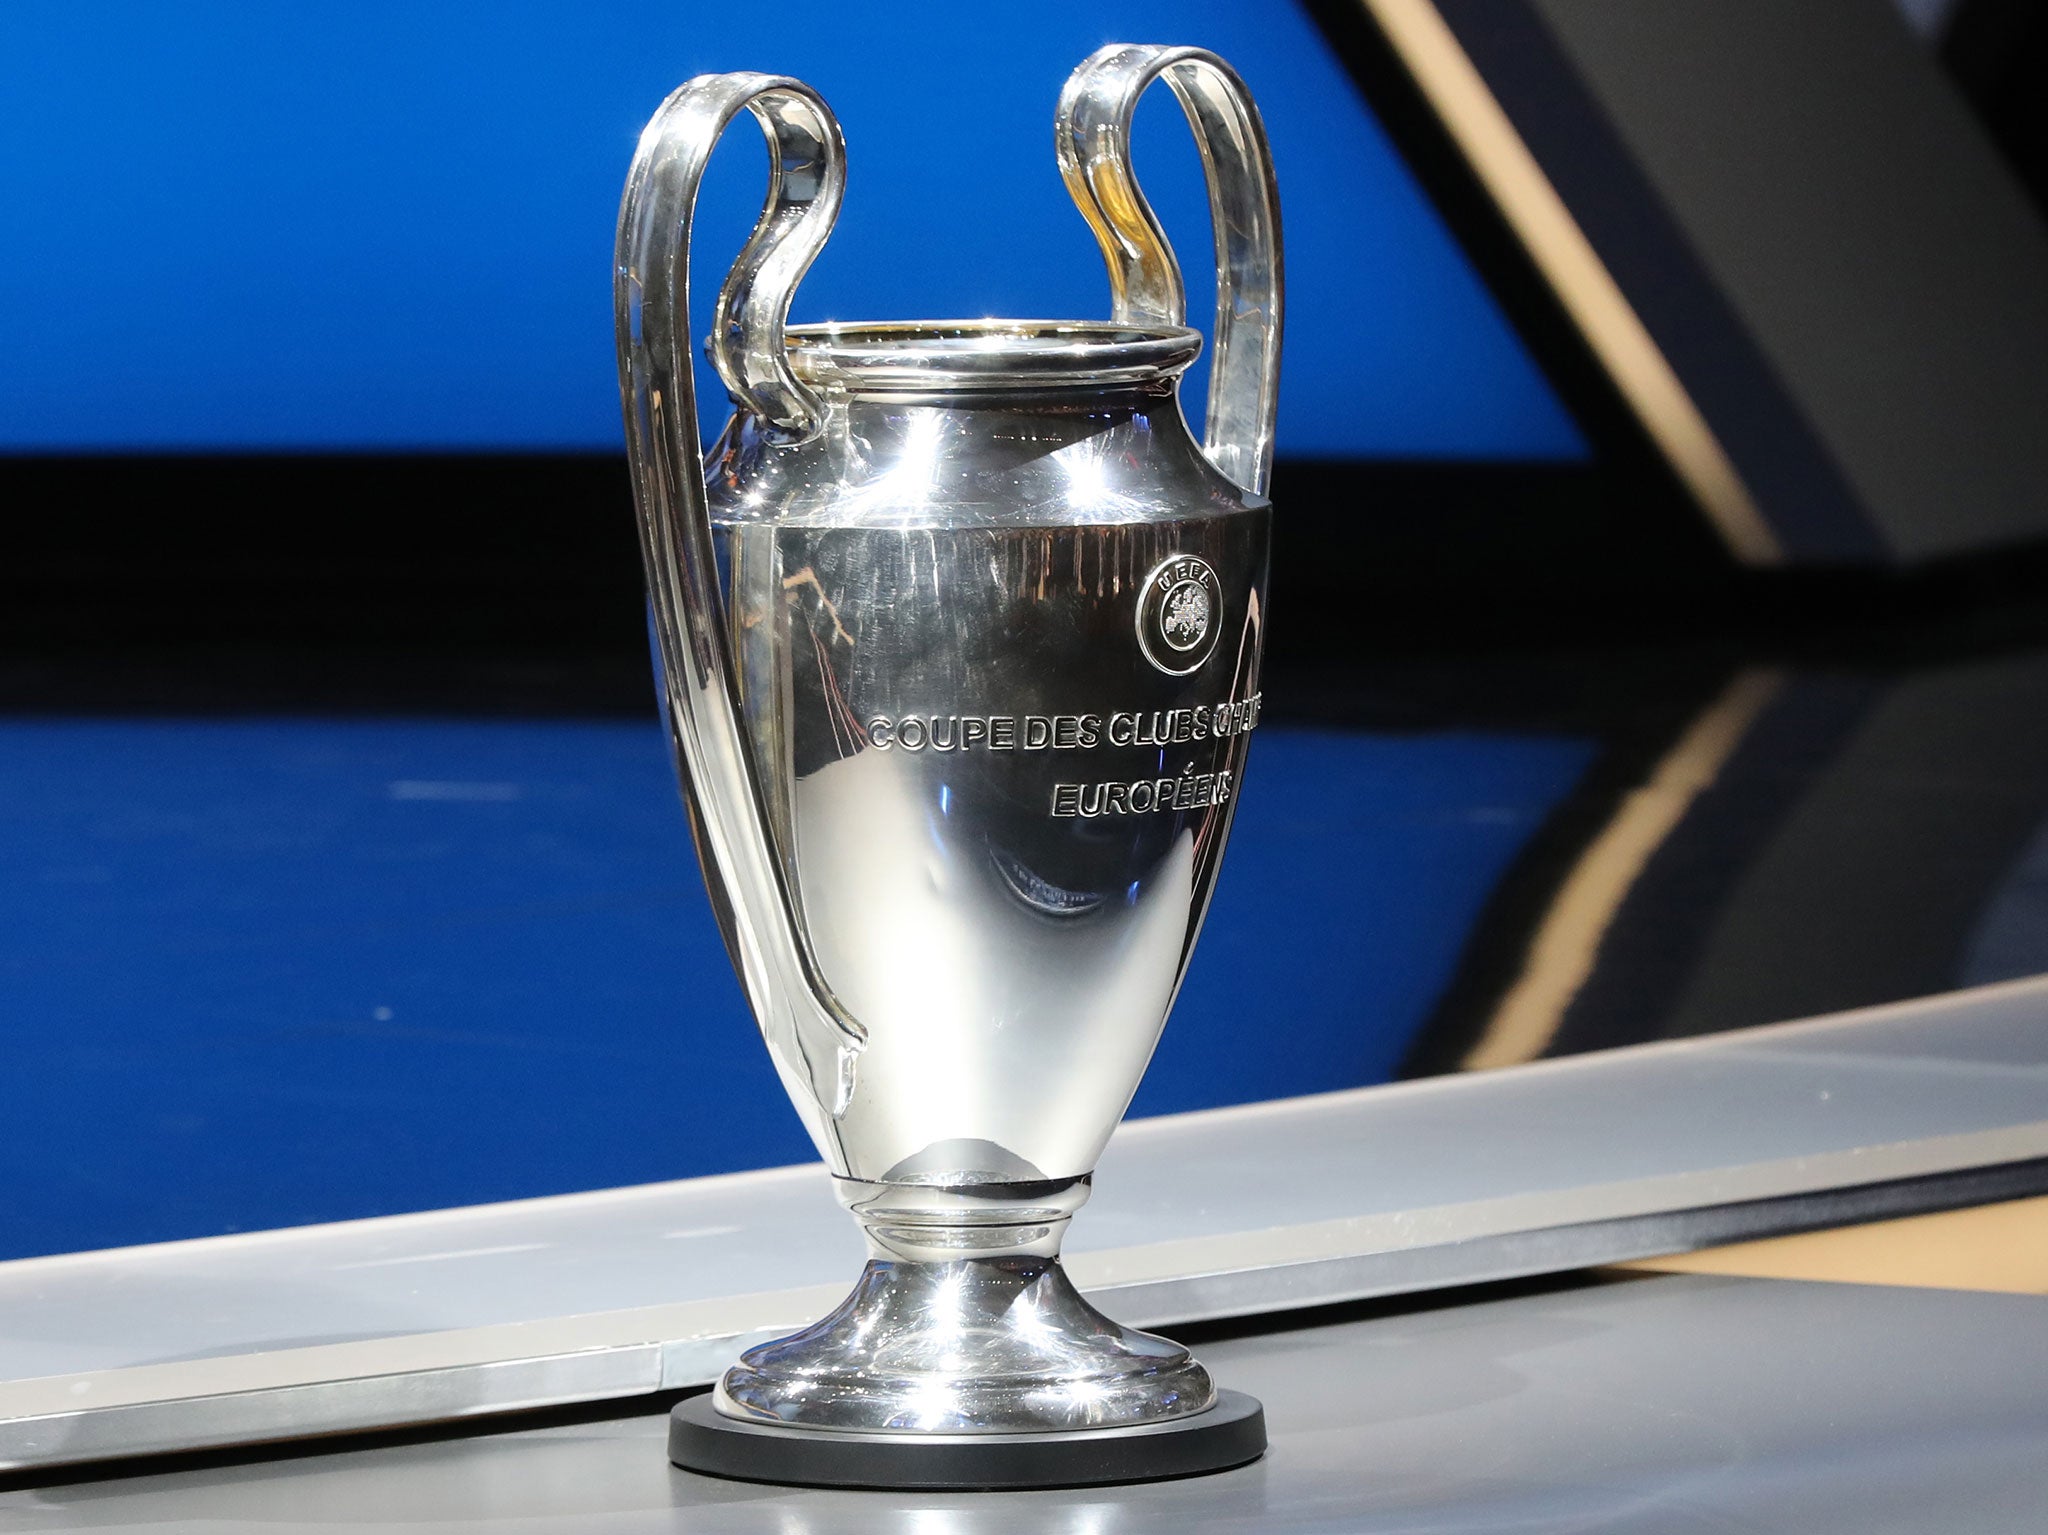 The Champions League final will be played in Cardiff at the Principality Stadium